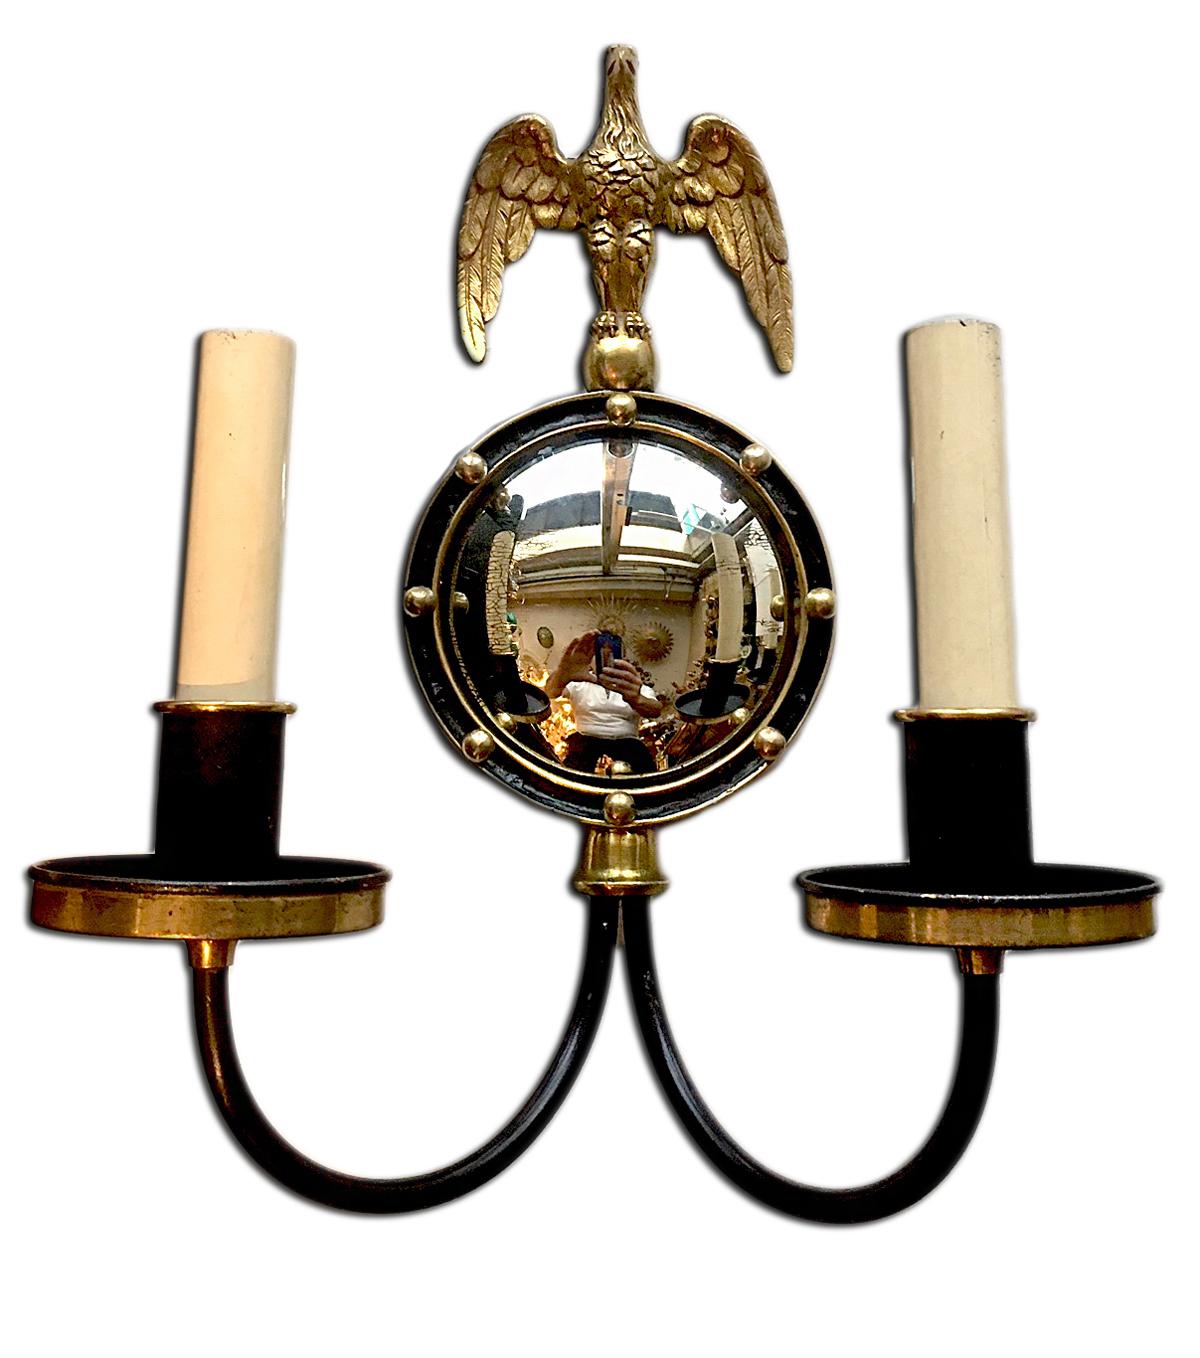 A pair of Empire Style circa 1920's American gilt bronze sconces with painted finish and mirror inset in backplate, eagle motif on back plate.

Measurements:
Height: 14